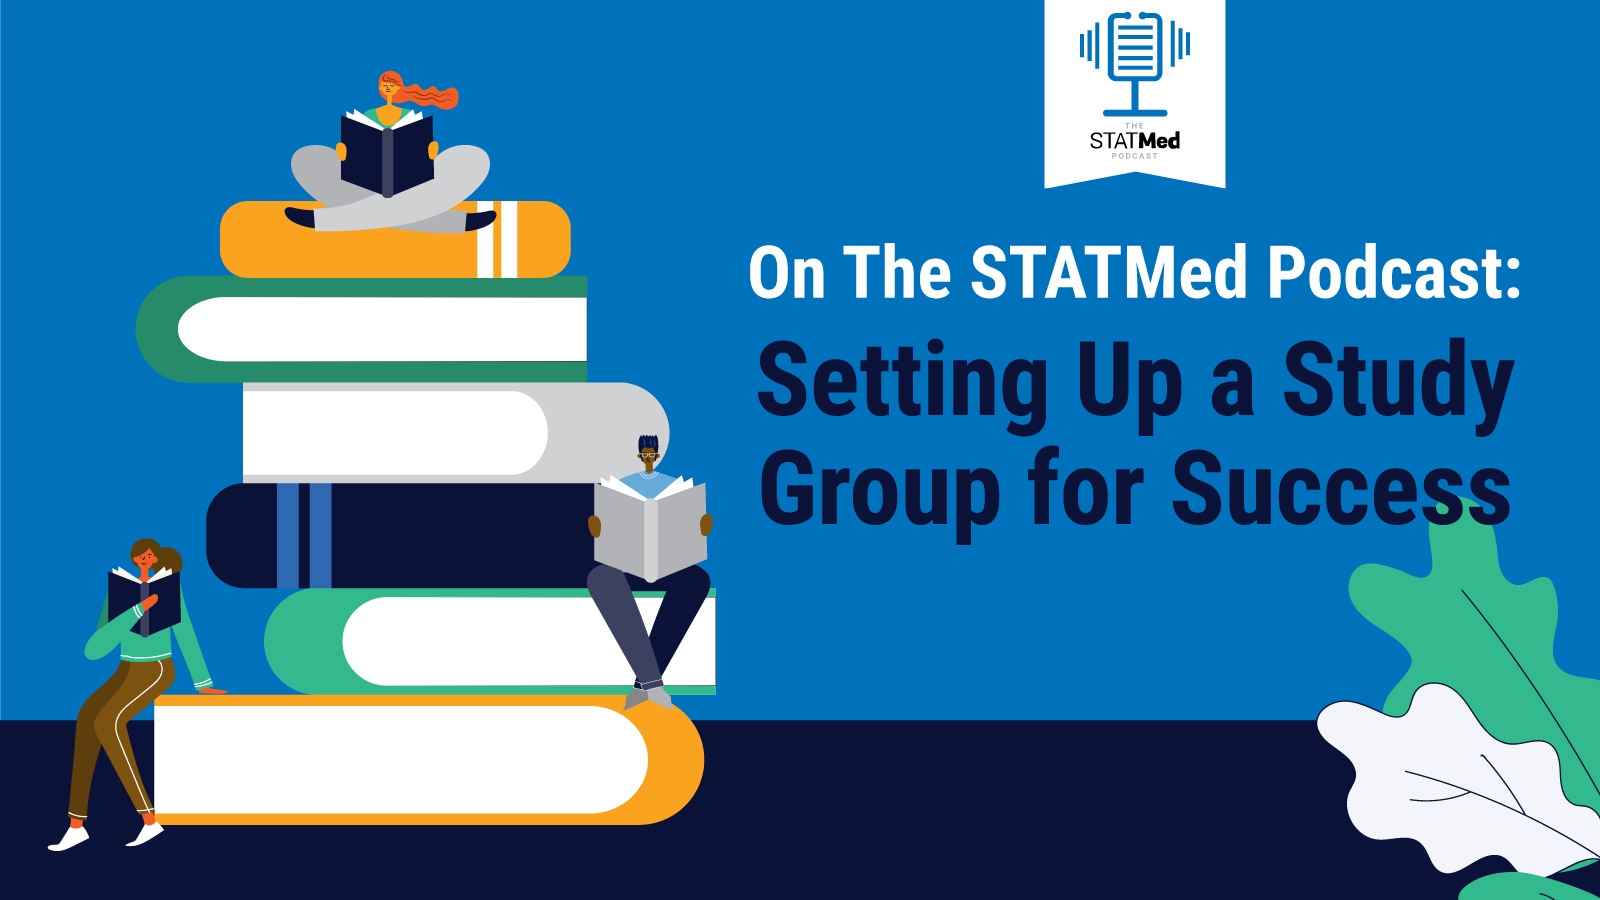 Featured image for “On The STATMed Podcast: Setting Up a Study Group for Success”